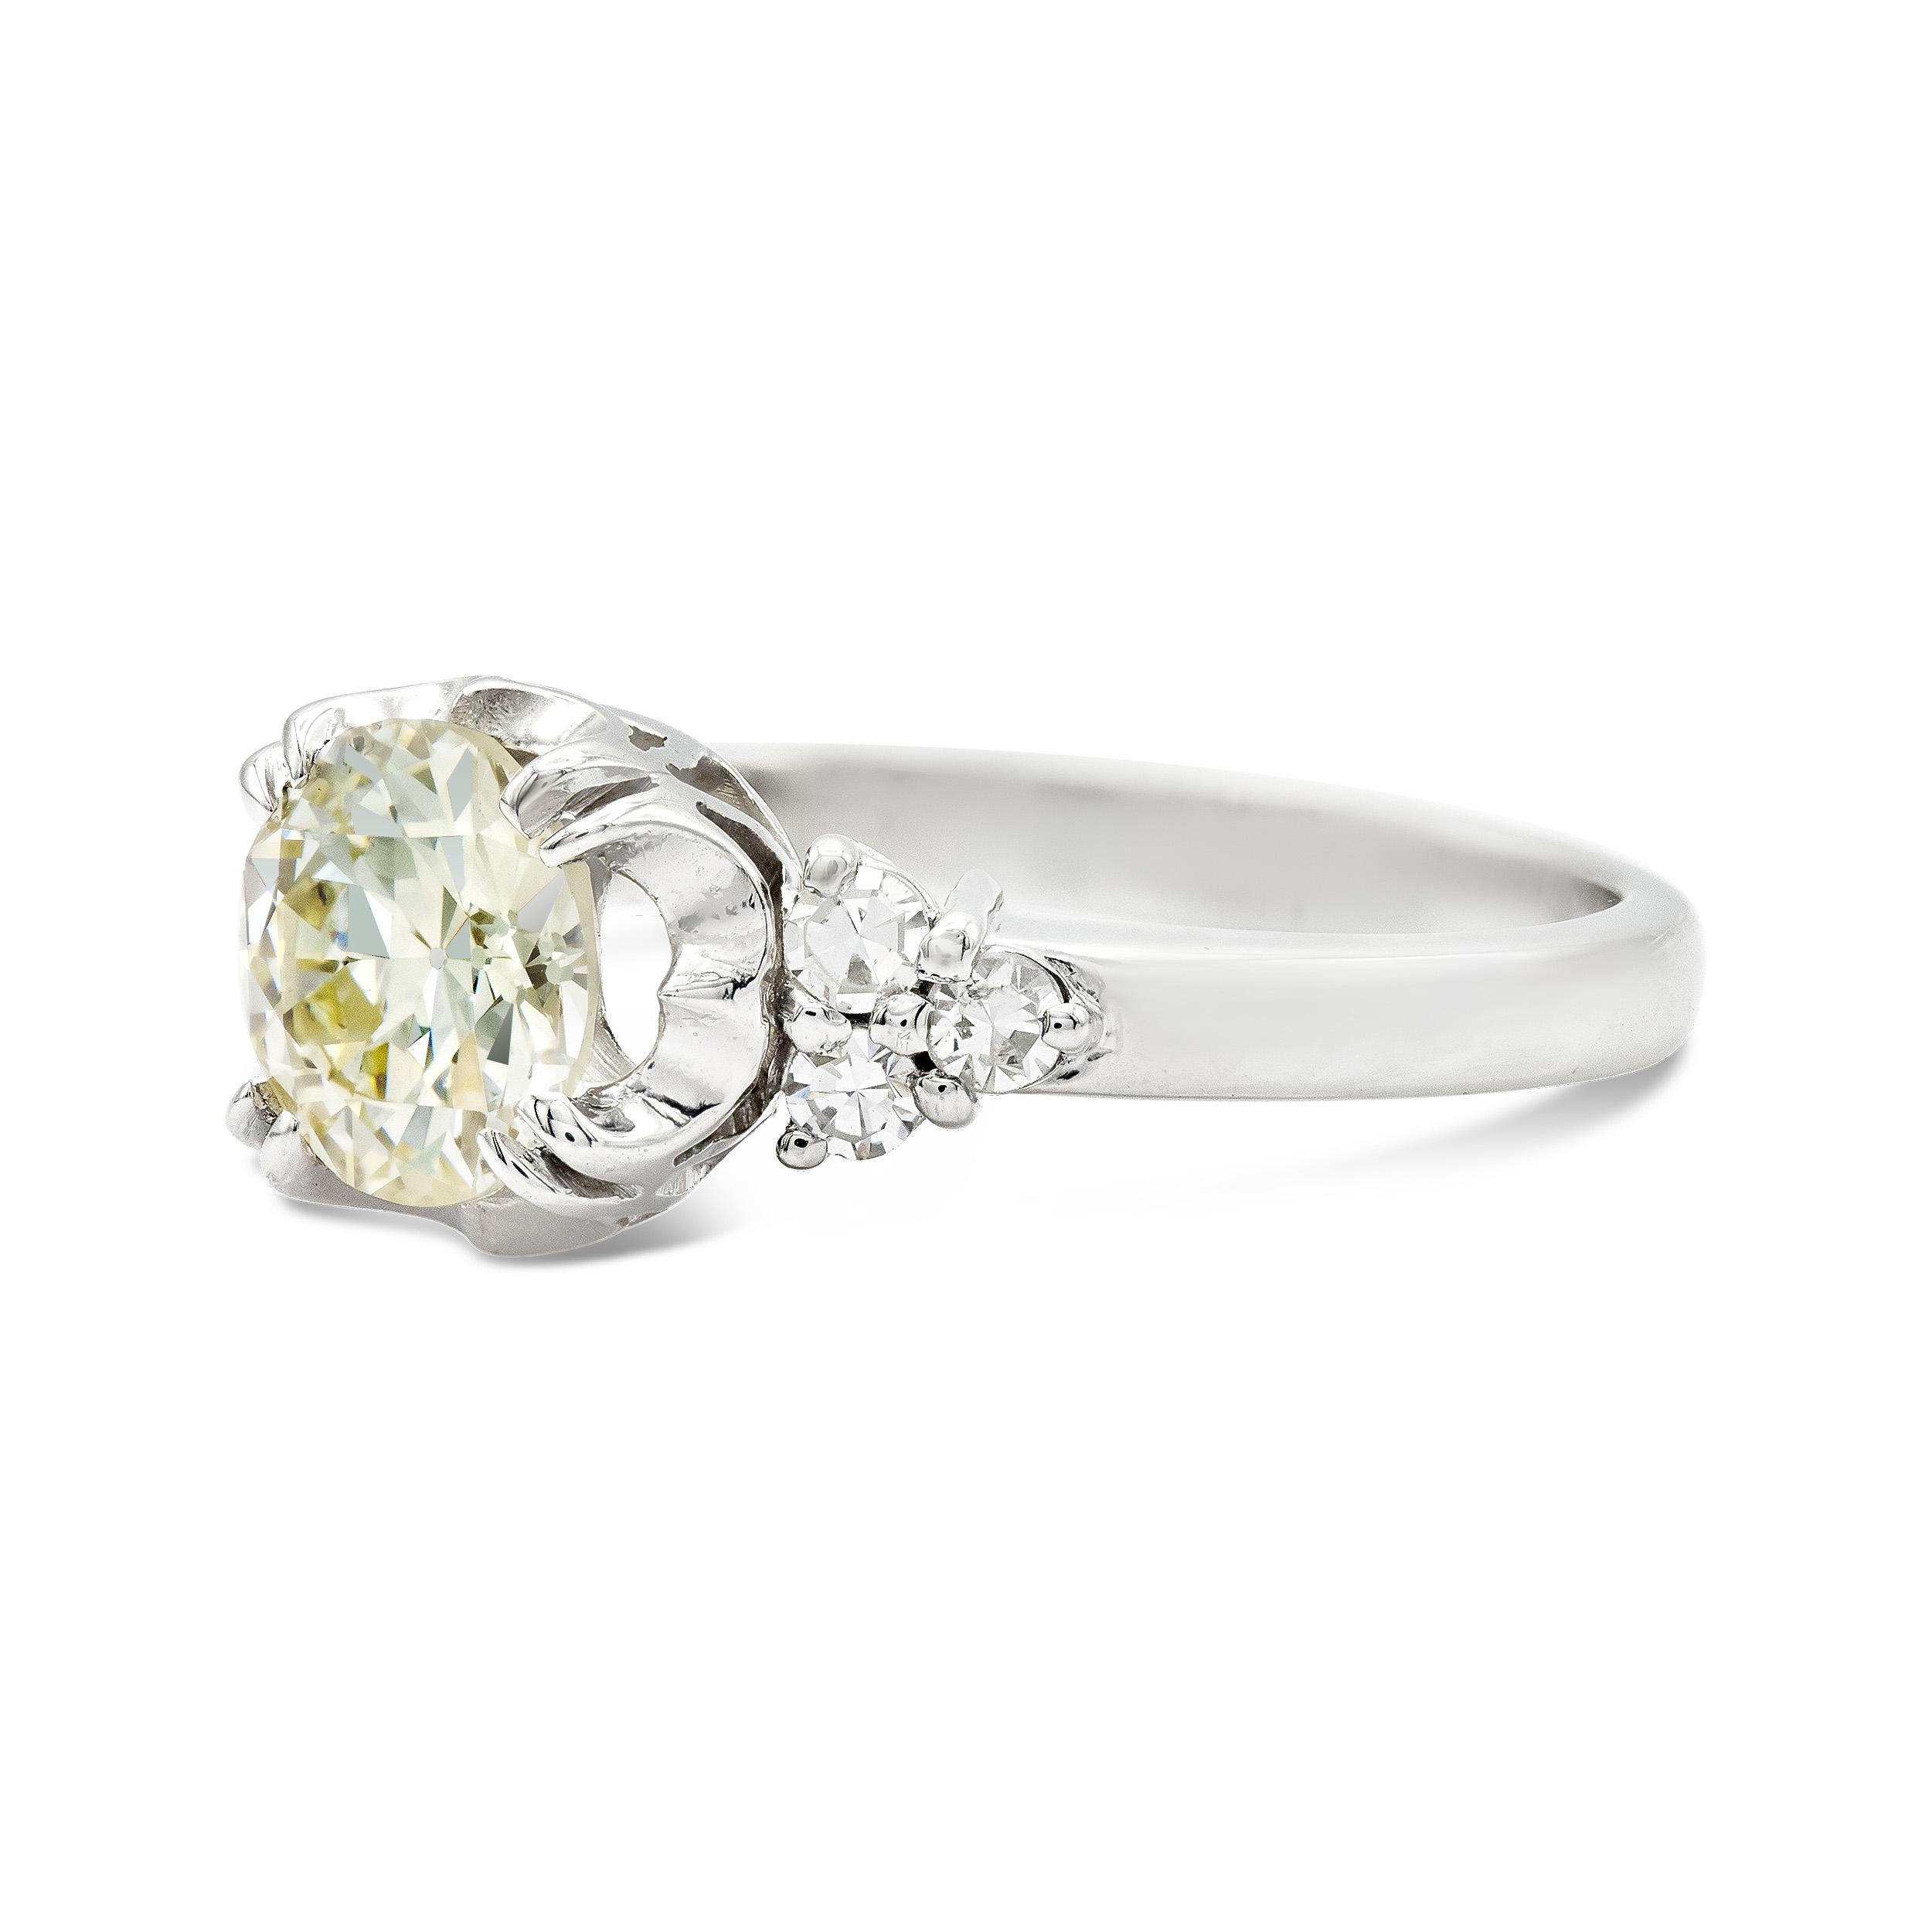 This deco era engagement ring is an absolute delight. A 1.44 carat old European cut diamond centers with its amazing facet pattern, it truly dances. We love the double claw prongs and buttercup style setting. A trio of single cut diamonds shoulder